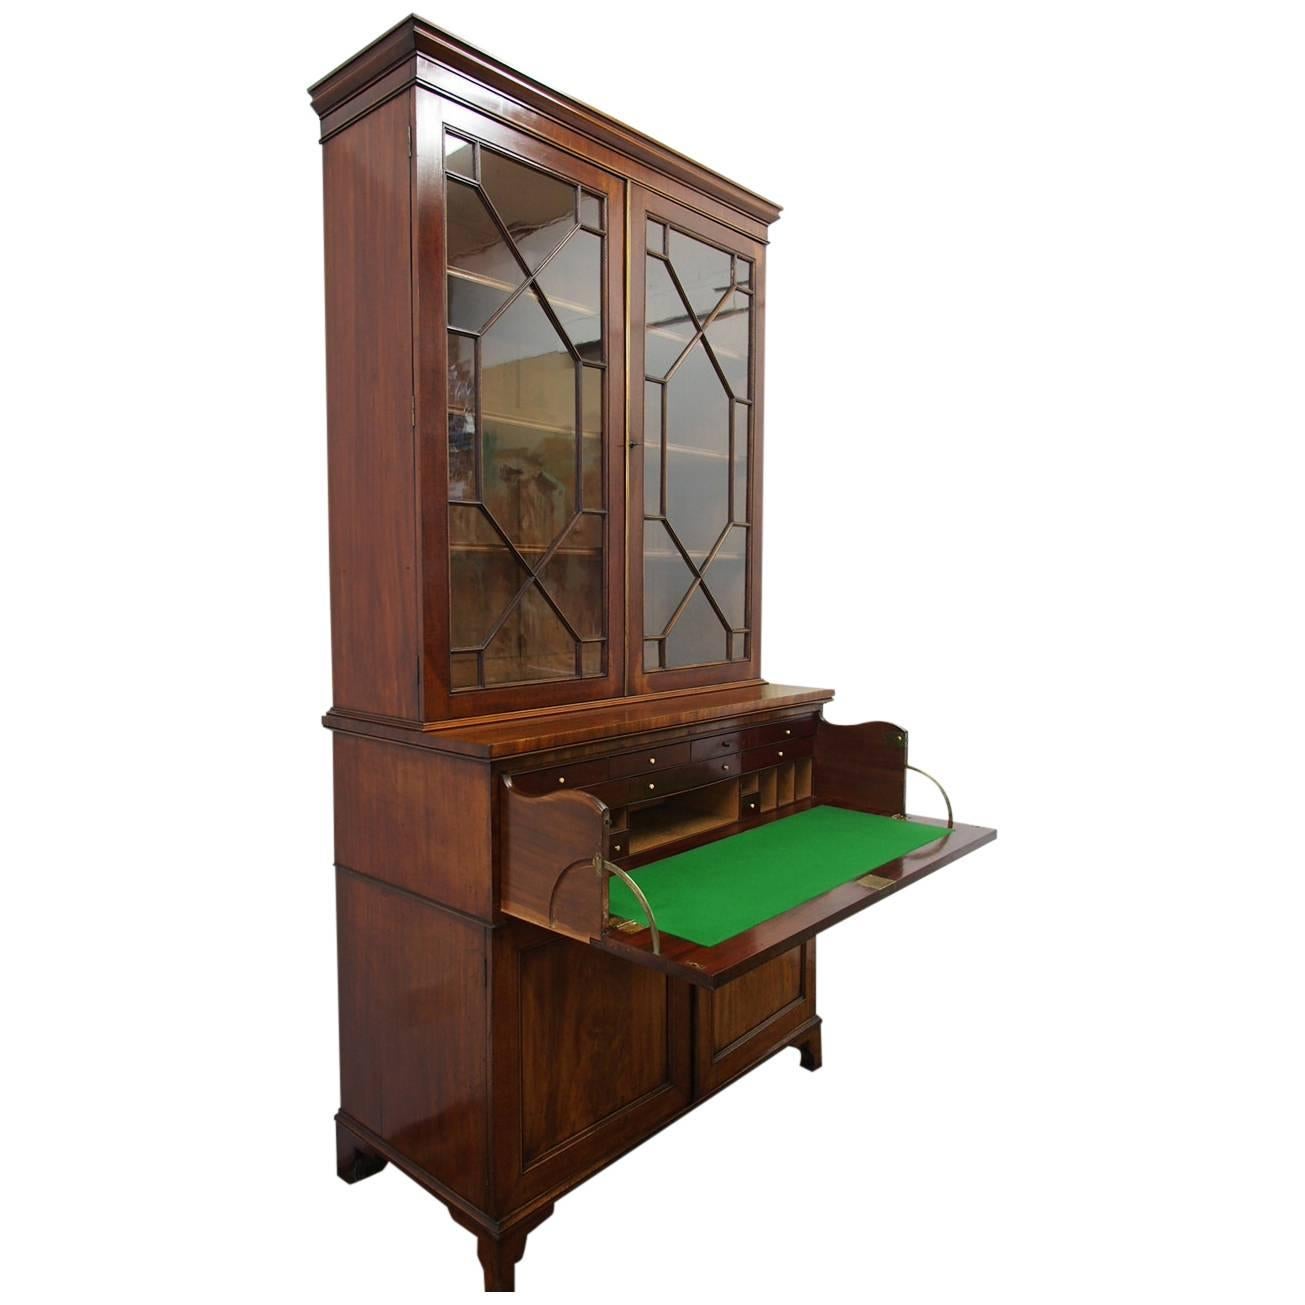 George III secretaire bookcase in figured Spanish mahogany, circa 1820. The upper section has classical astragal glazing with three adjustable shelves and fluted mahogany fronting; all surmounted by a simple figured mahogany frieze and neat